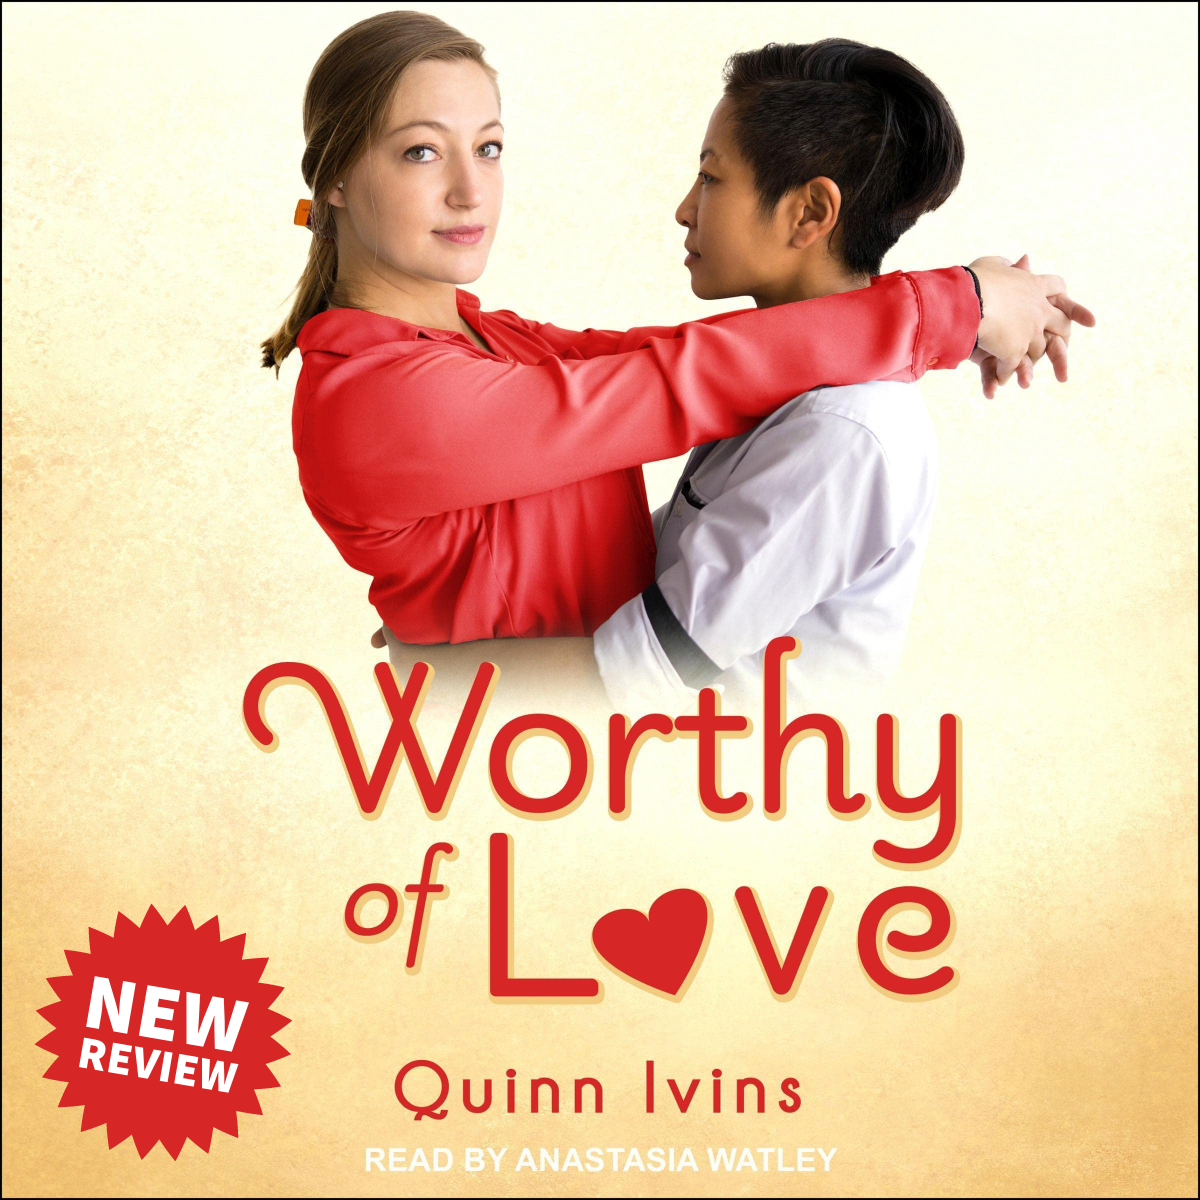 What a story Worthy of Love was. This one reminded me of Schitt's Creek in all the right ways. 

@quinnivins @TantorAudio 

#SapphicRomance #Audiobook #AudiobookReview #BookReview